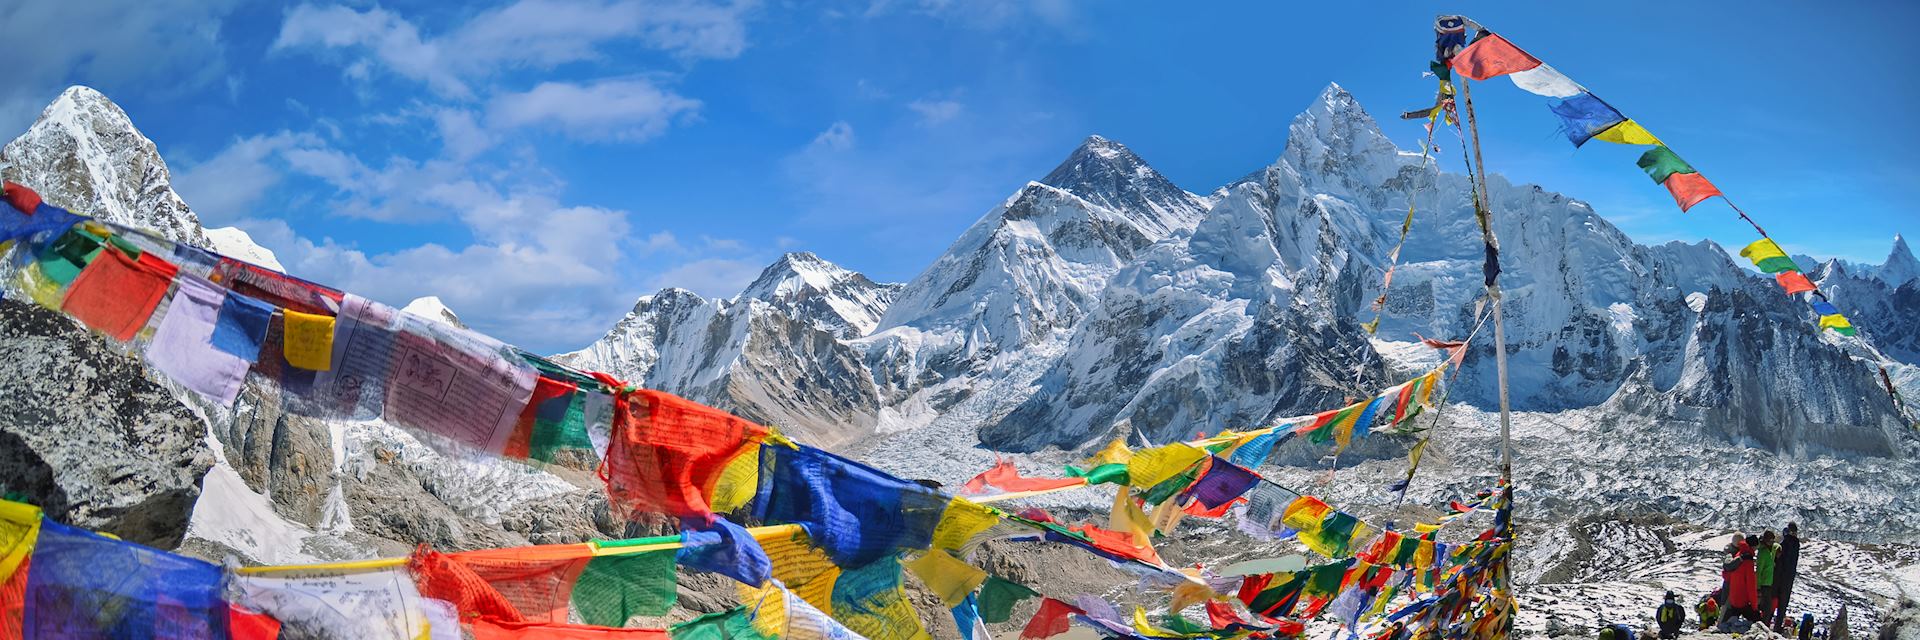 Where to go in the Himalaya | Audley Travel US